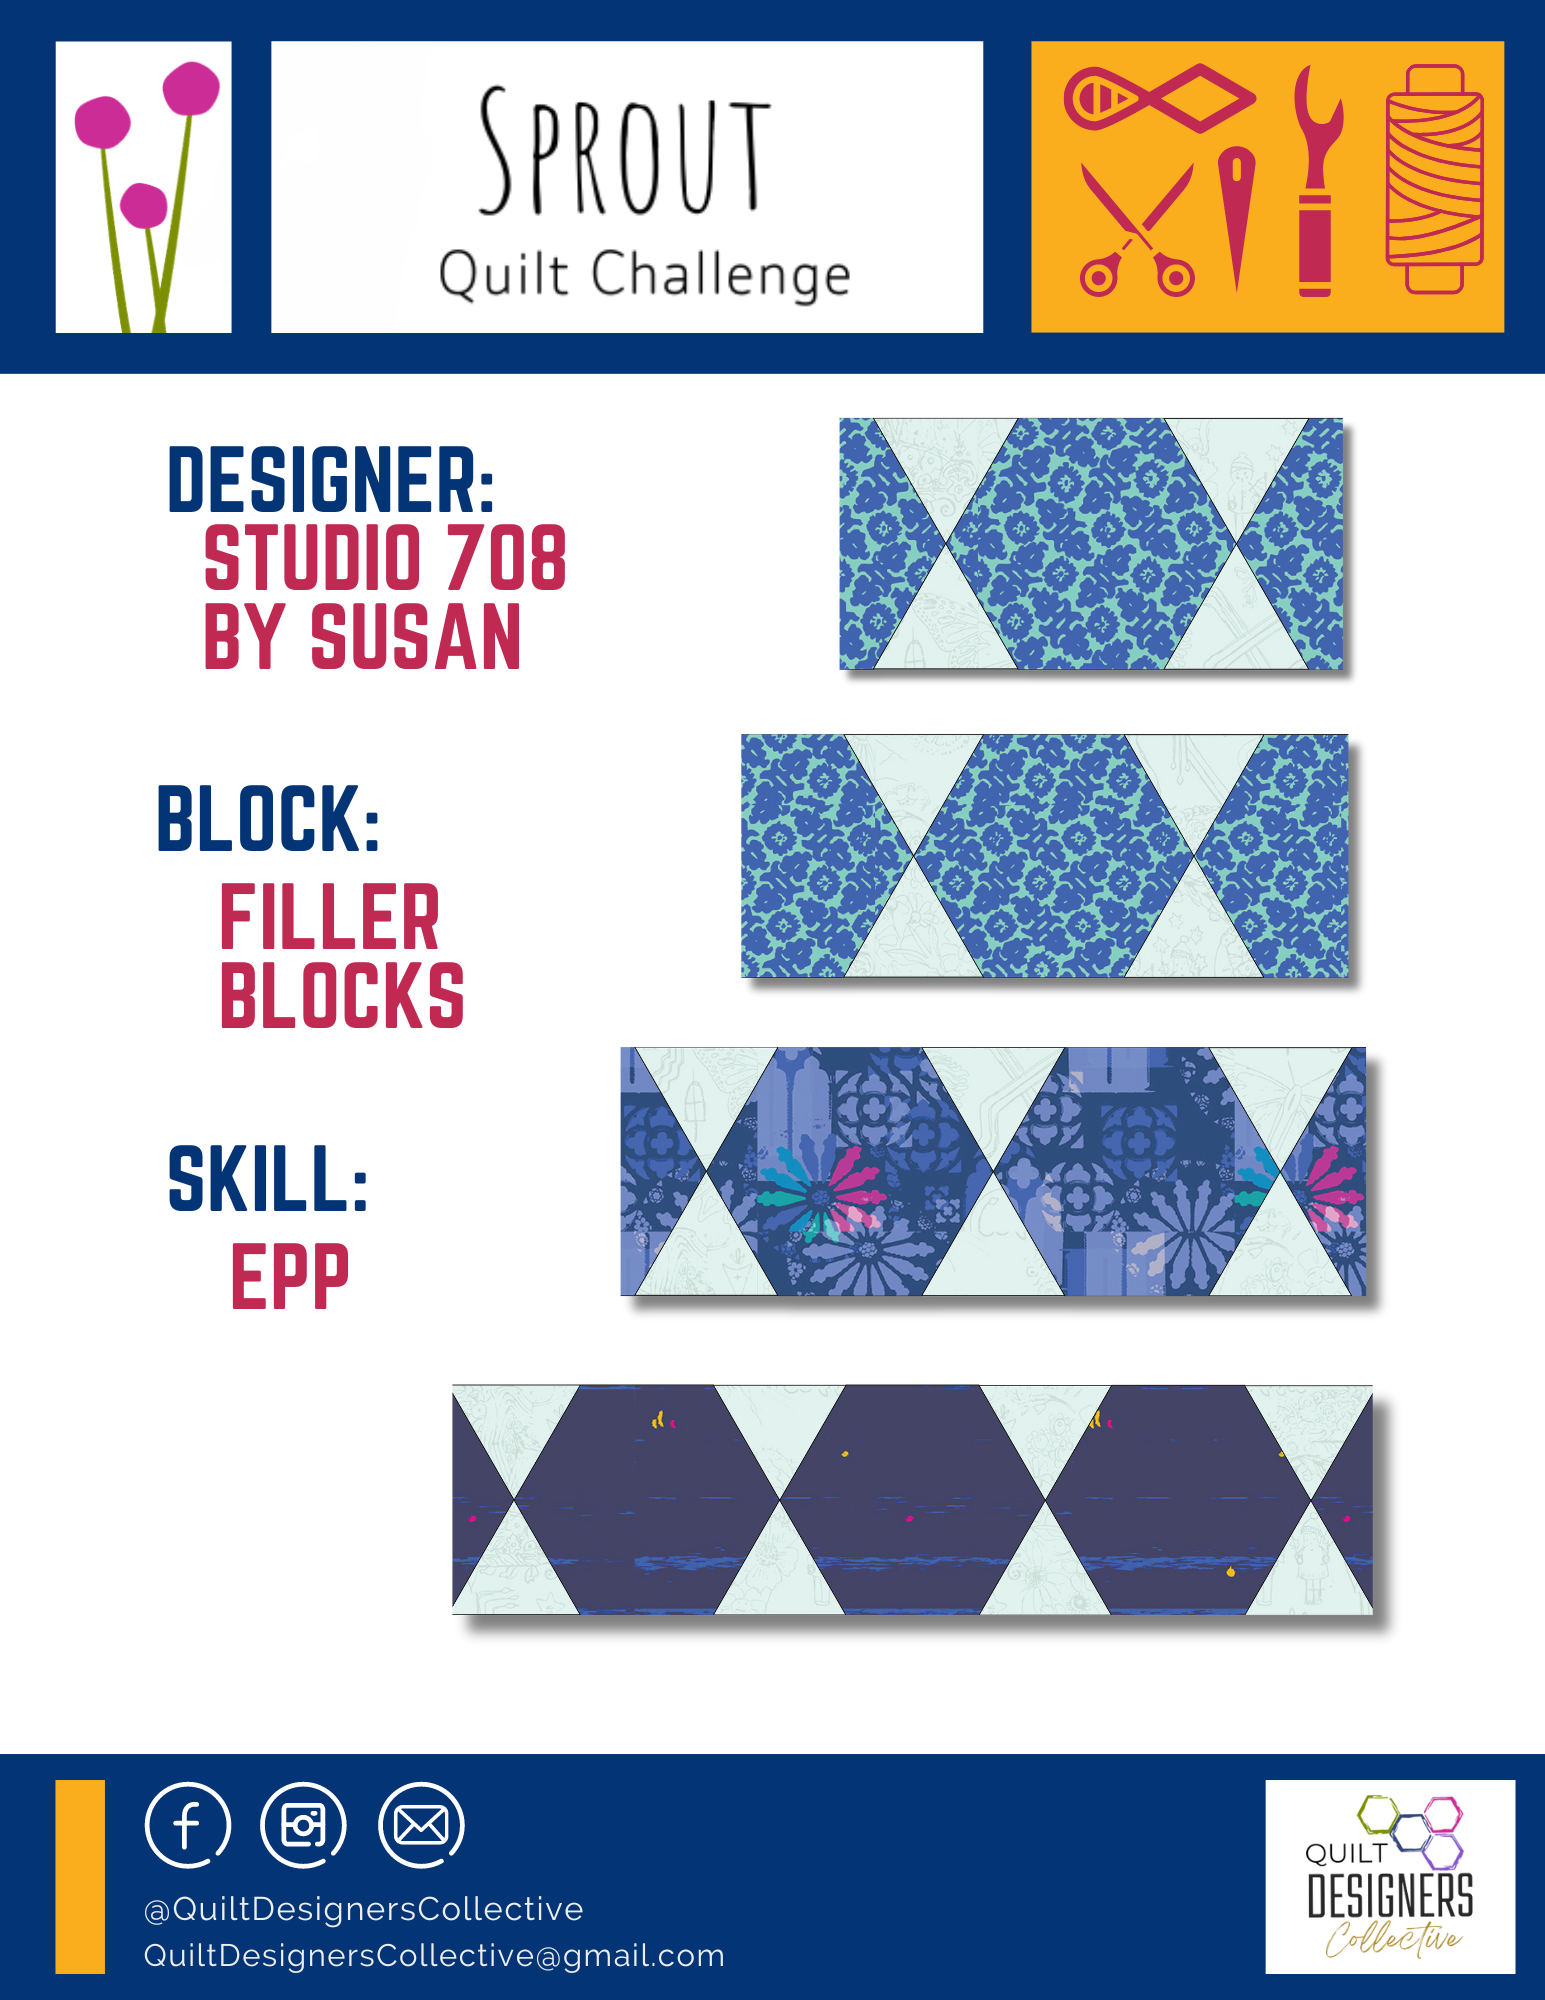 English Paper Pieced Filler Blocks for Sprout Quilt